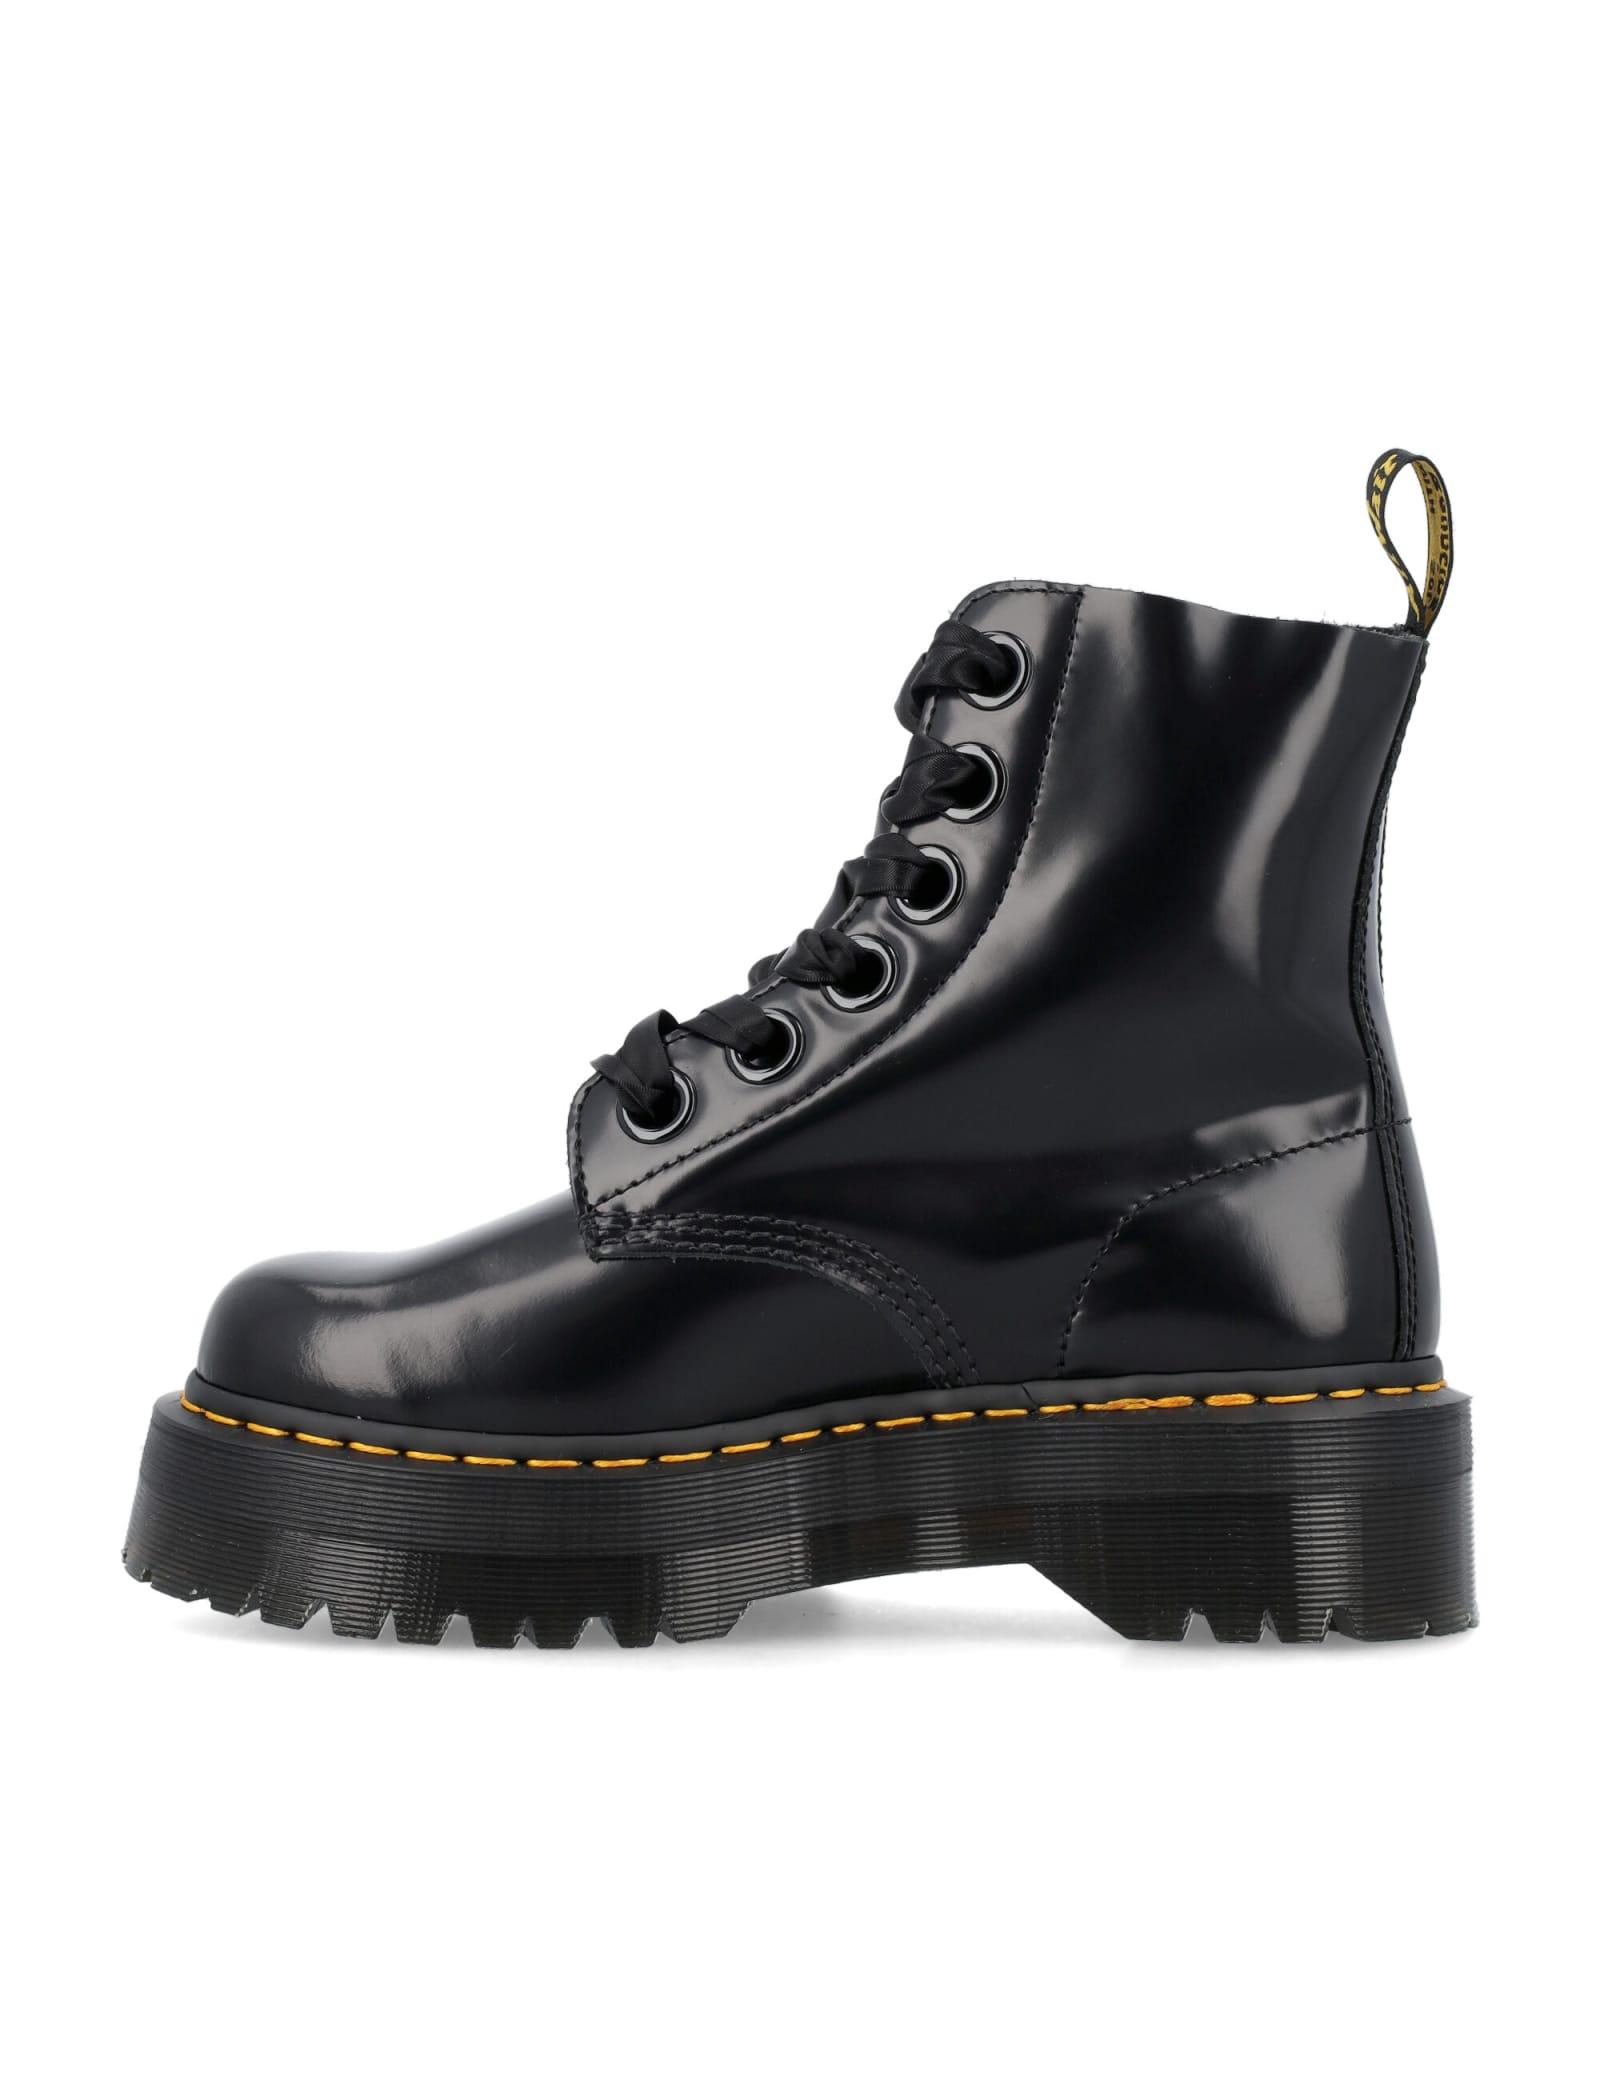 Dr. Martens Molly Platform Boots in Nero (Black) - Save 14% | Lyst